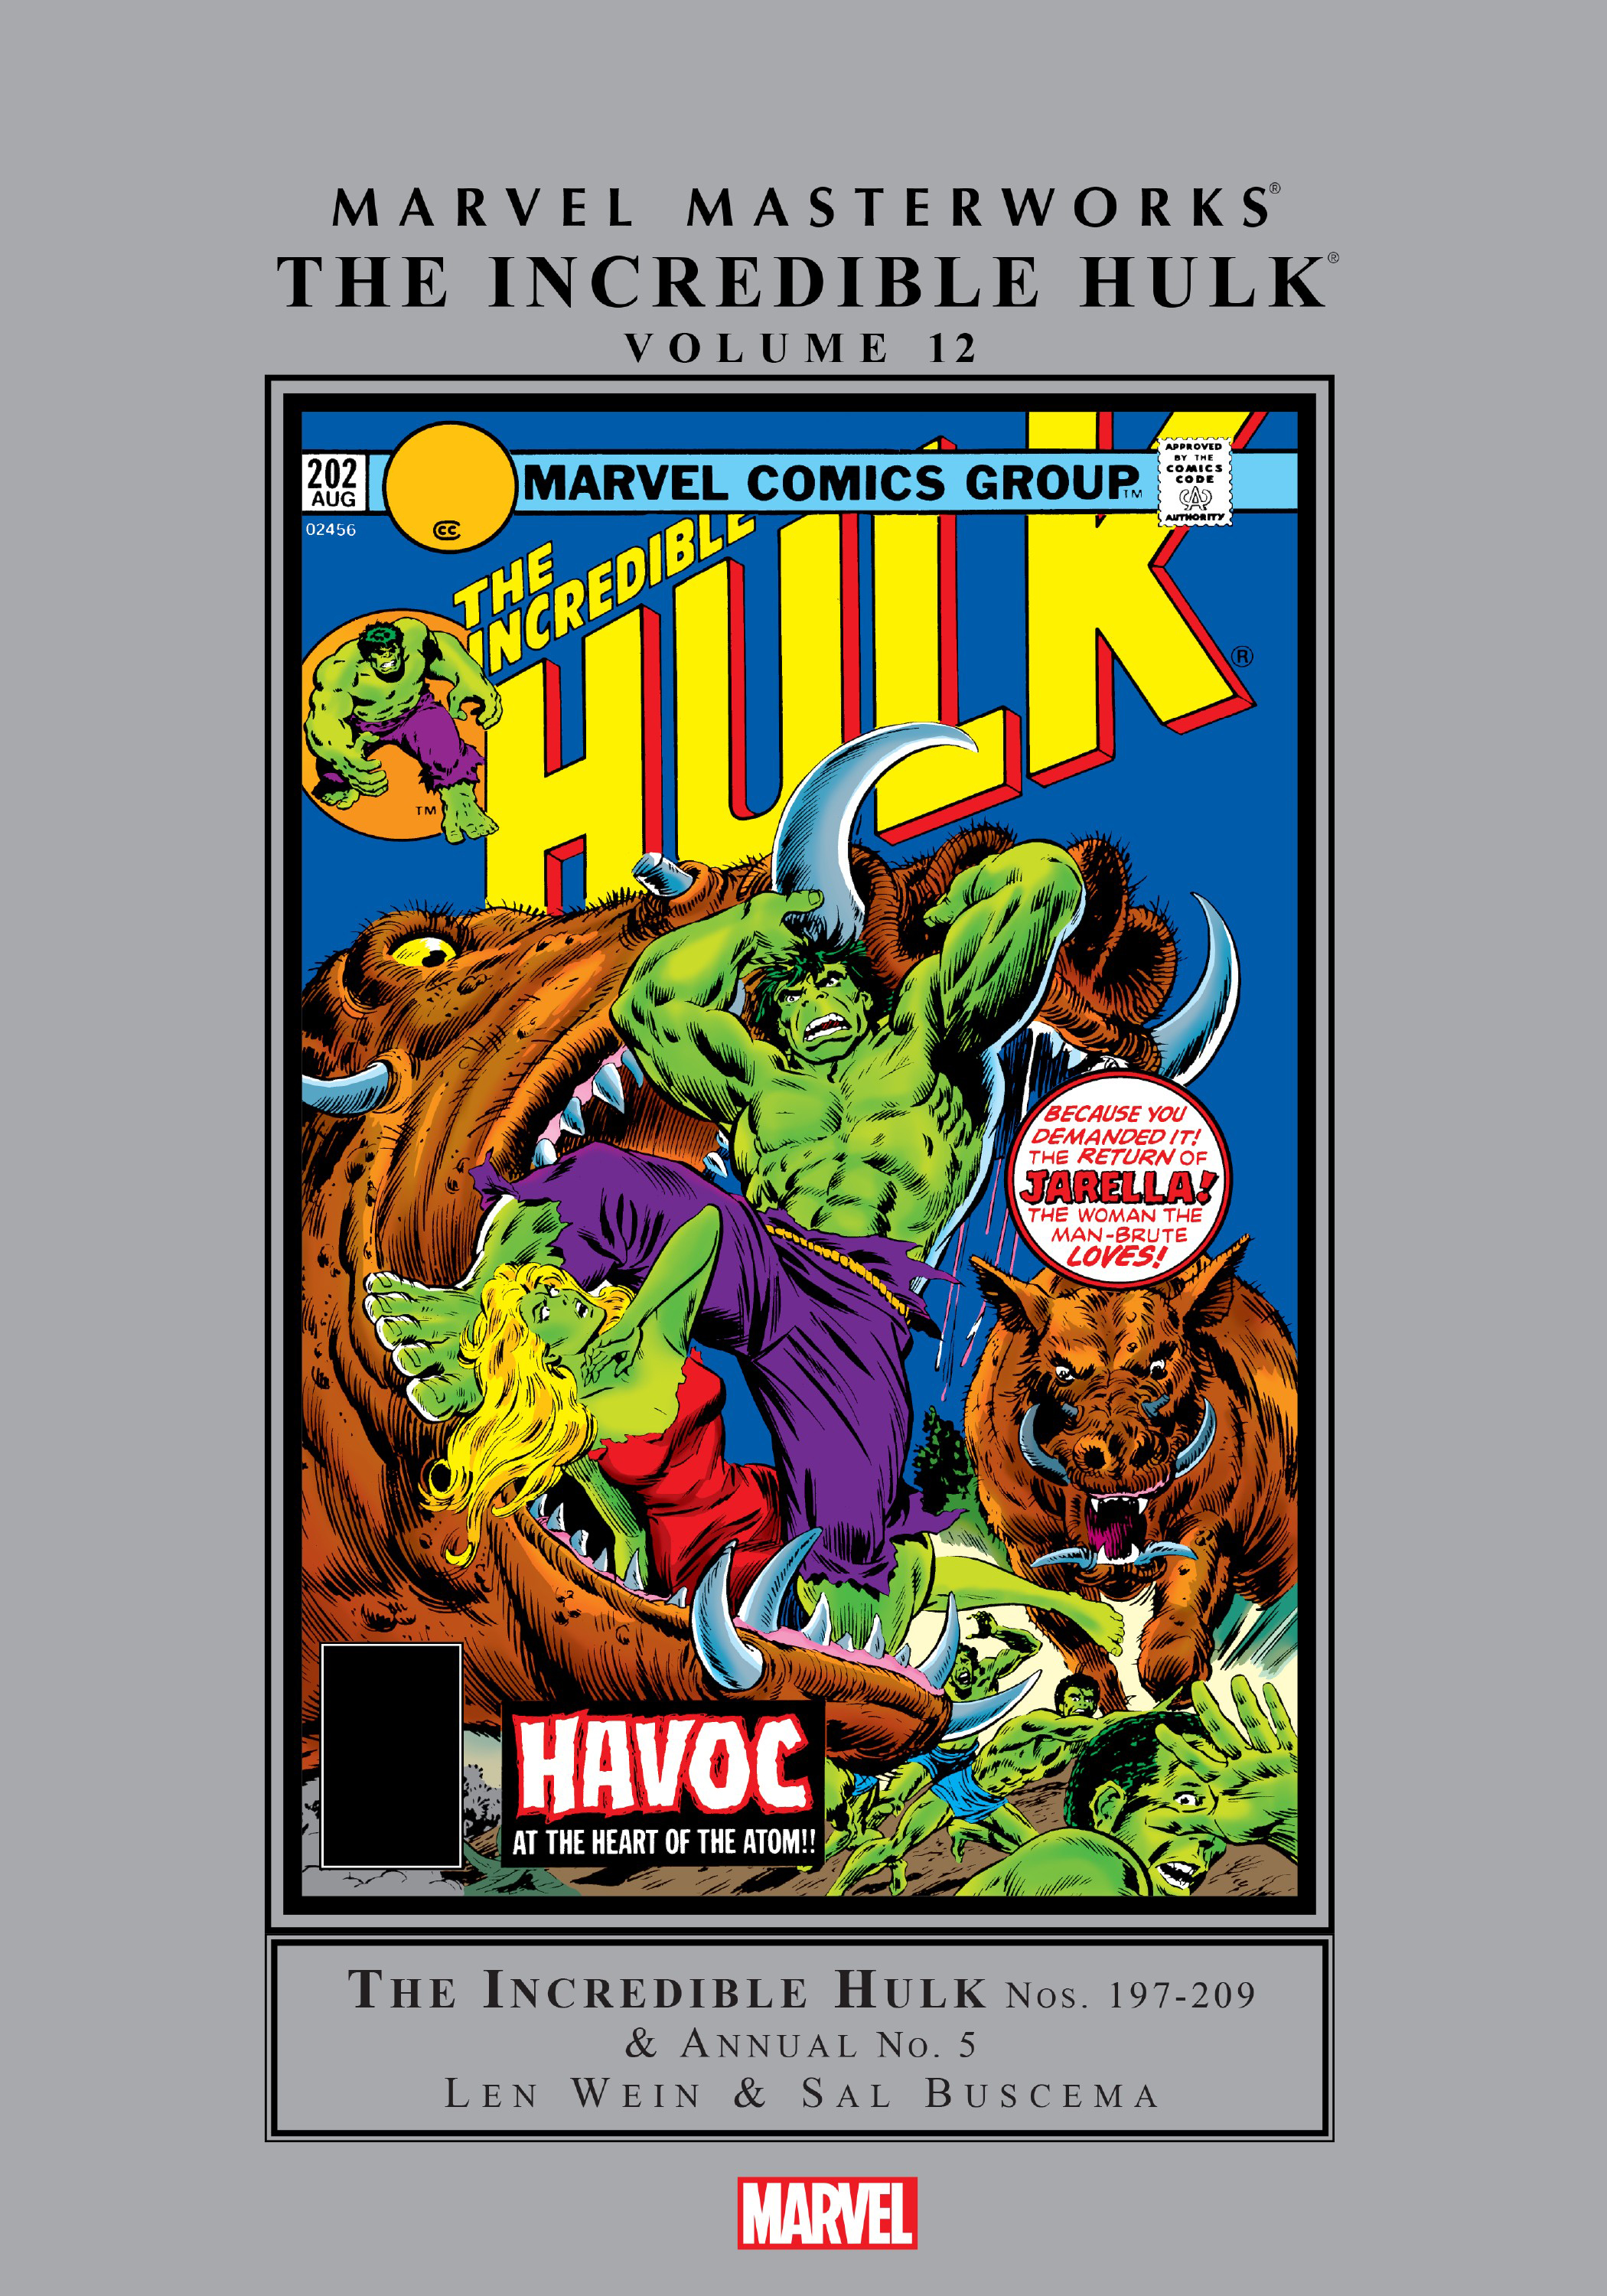 The Incredible Hulk Cartoon Porn - Marvel Masterworks The Incredible Hulk Tpb 12 Part 1 | Read Marvel  Masterworks The Incredible Hulk Tpb 12 Part 1 comic online in high quality.  Read Full Comic online for free -